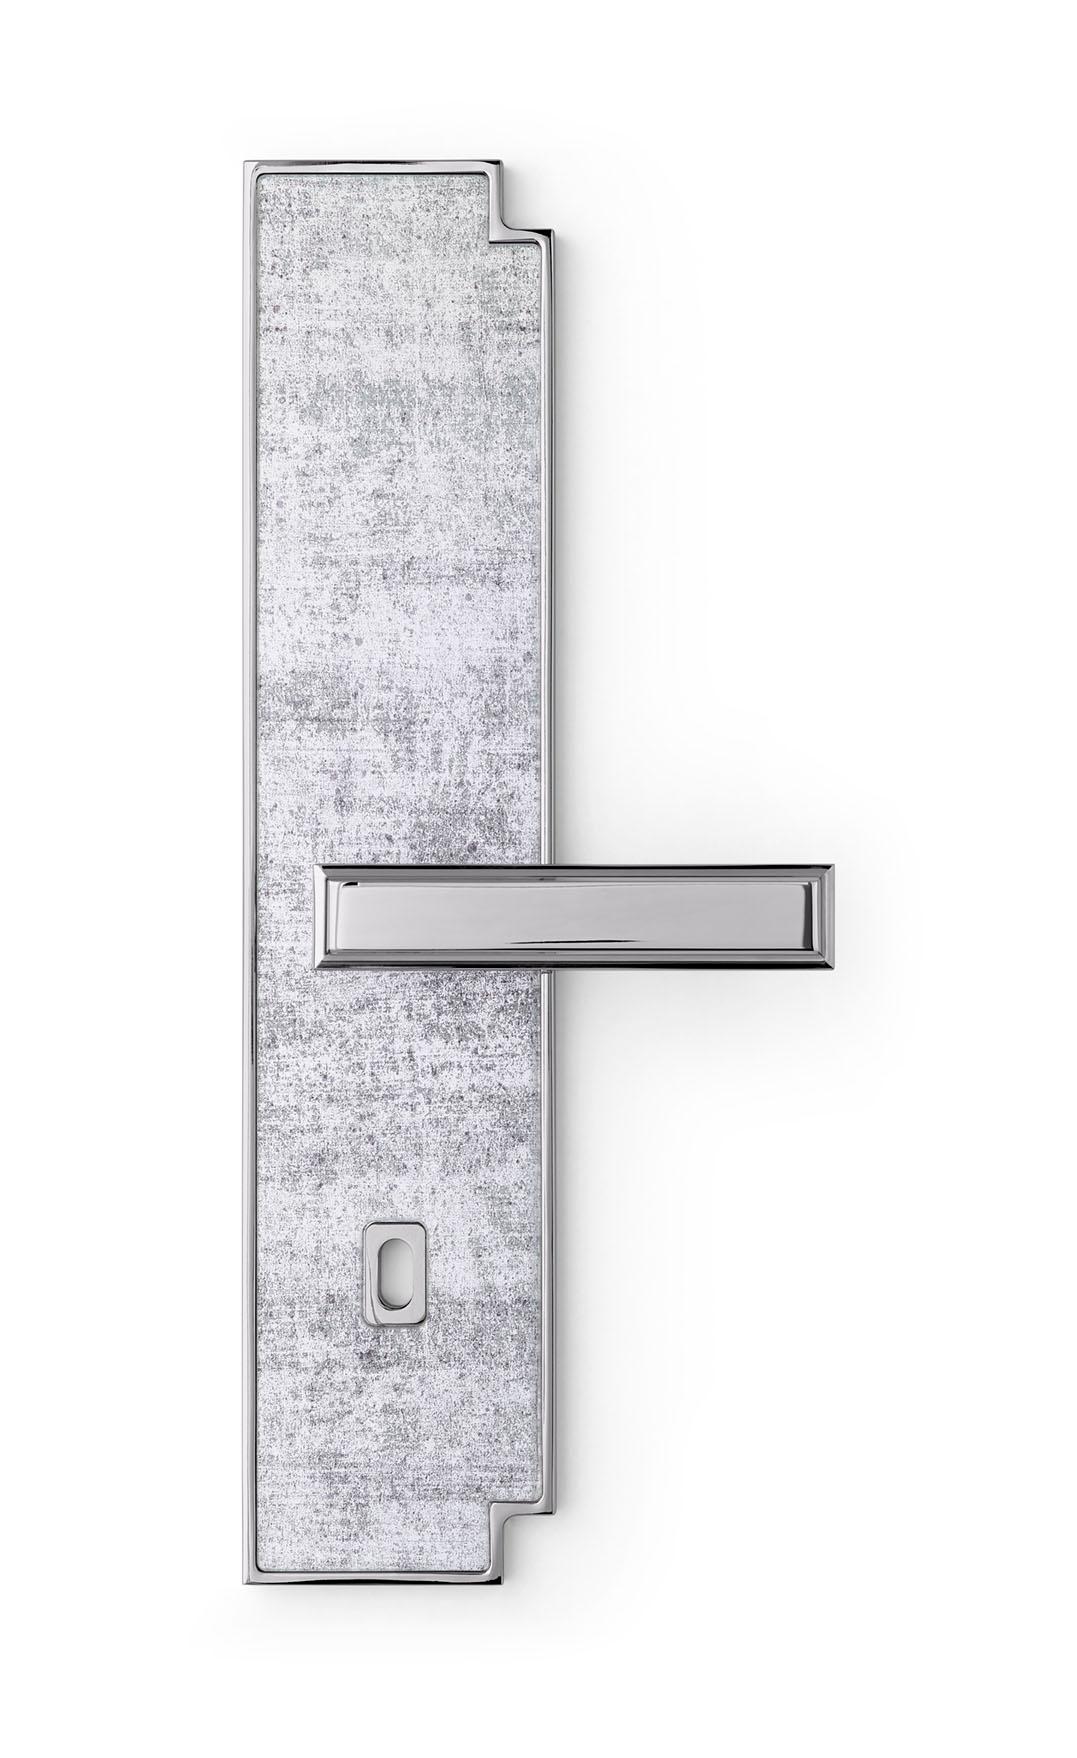 Contemporary Door Handle Aluminum Plate Brass Handle Body Polished Chrome Finished Vetrite For Sale